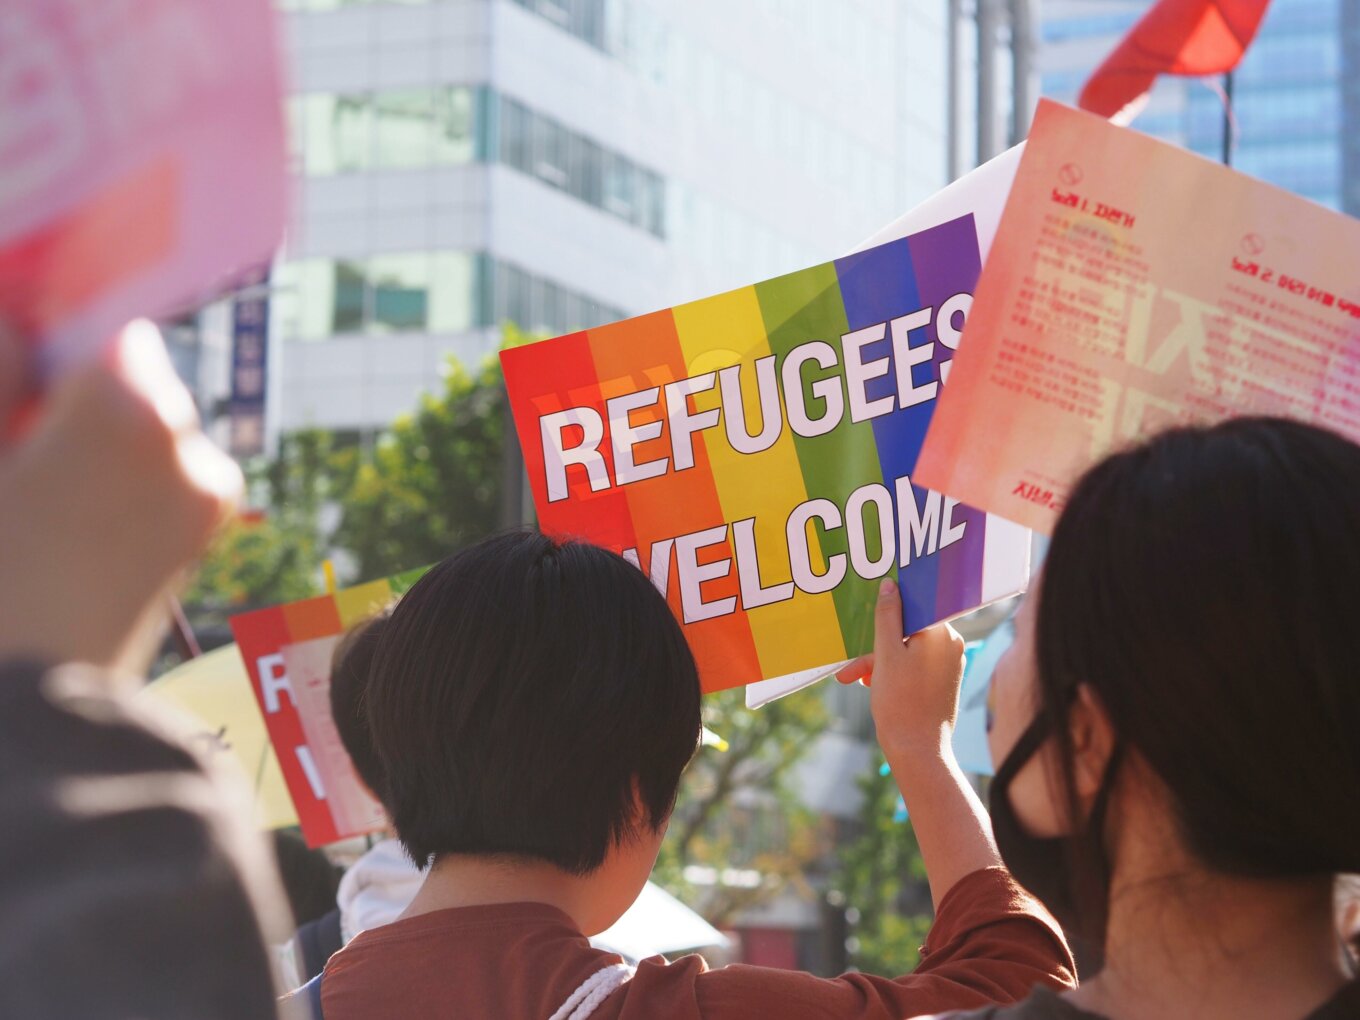 Protestors hold a sign saying "refugees welcome"